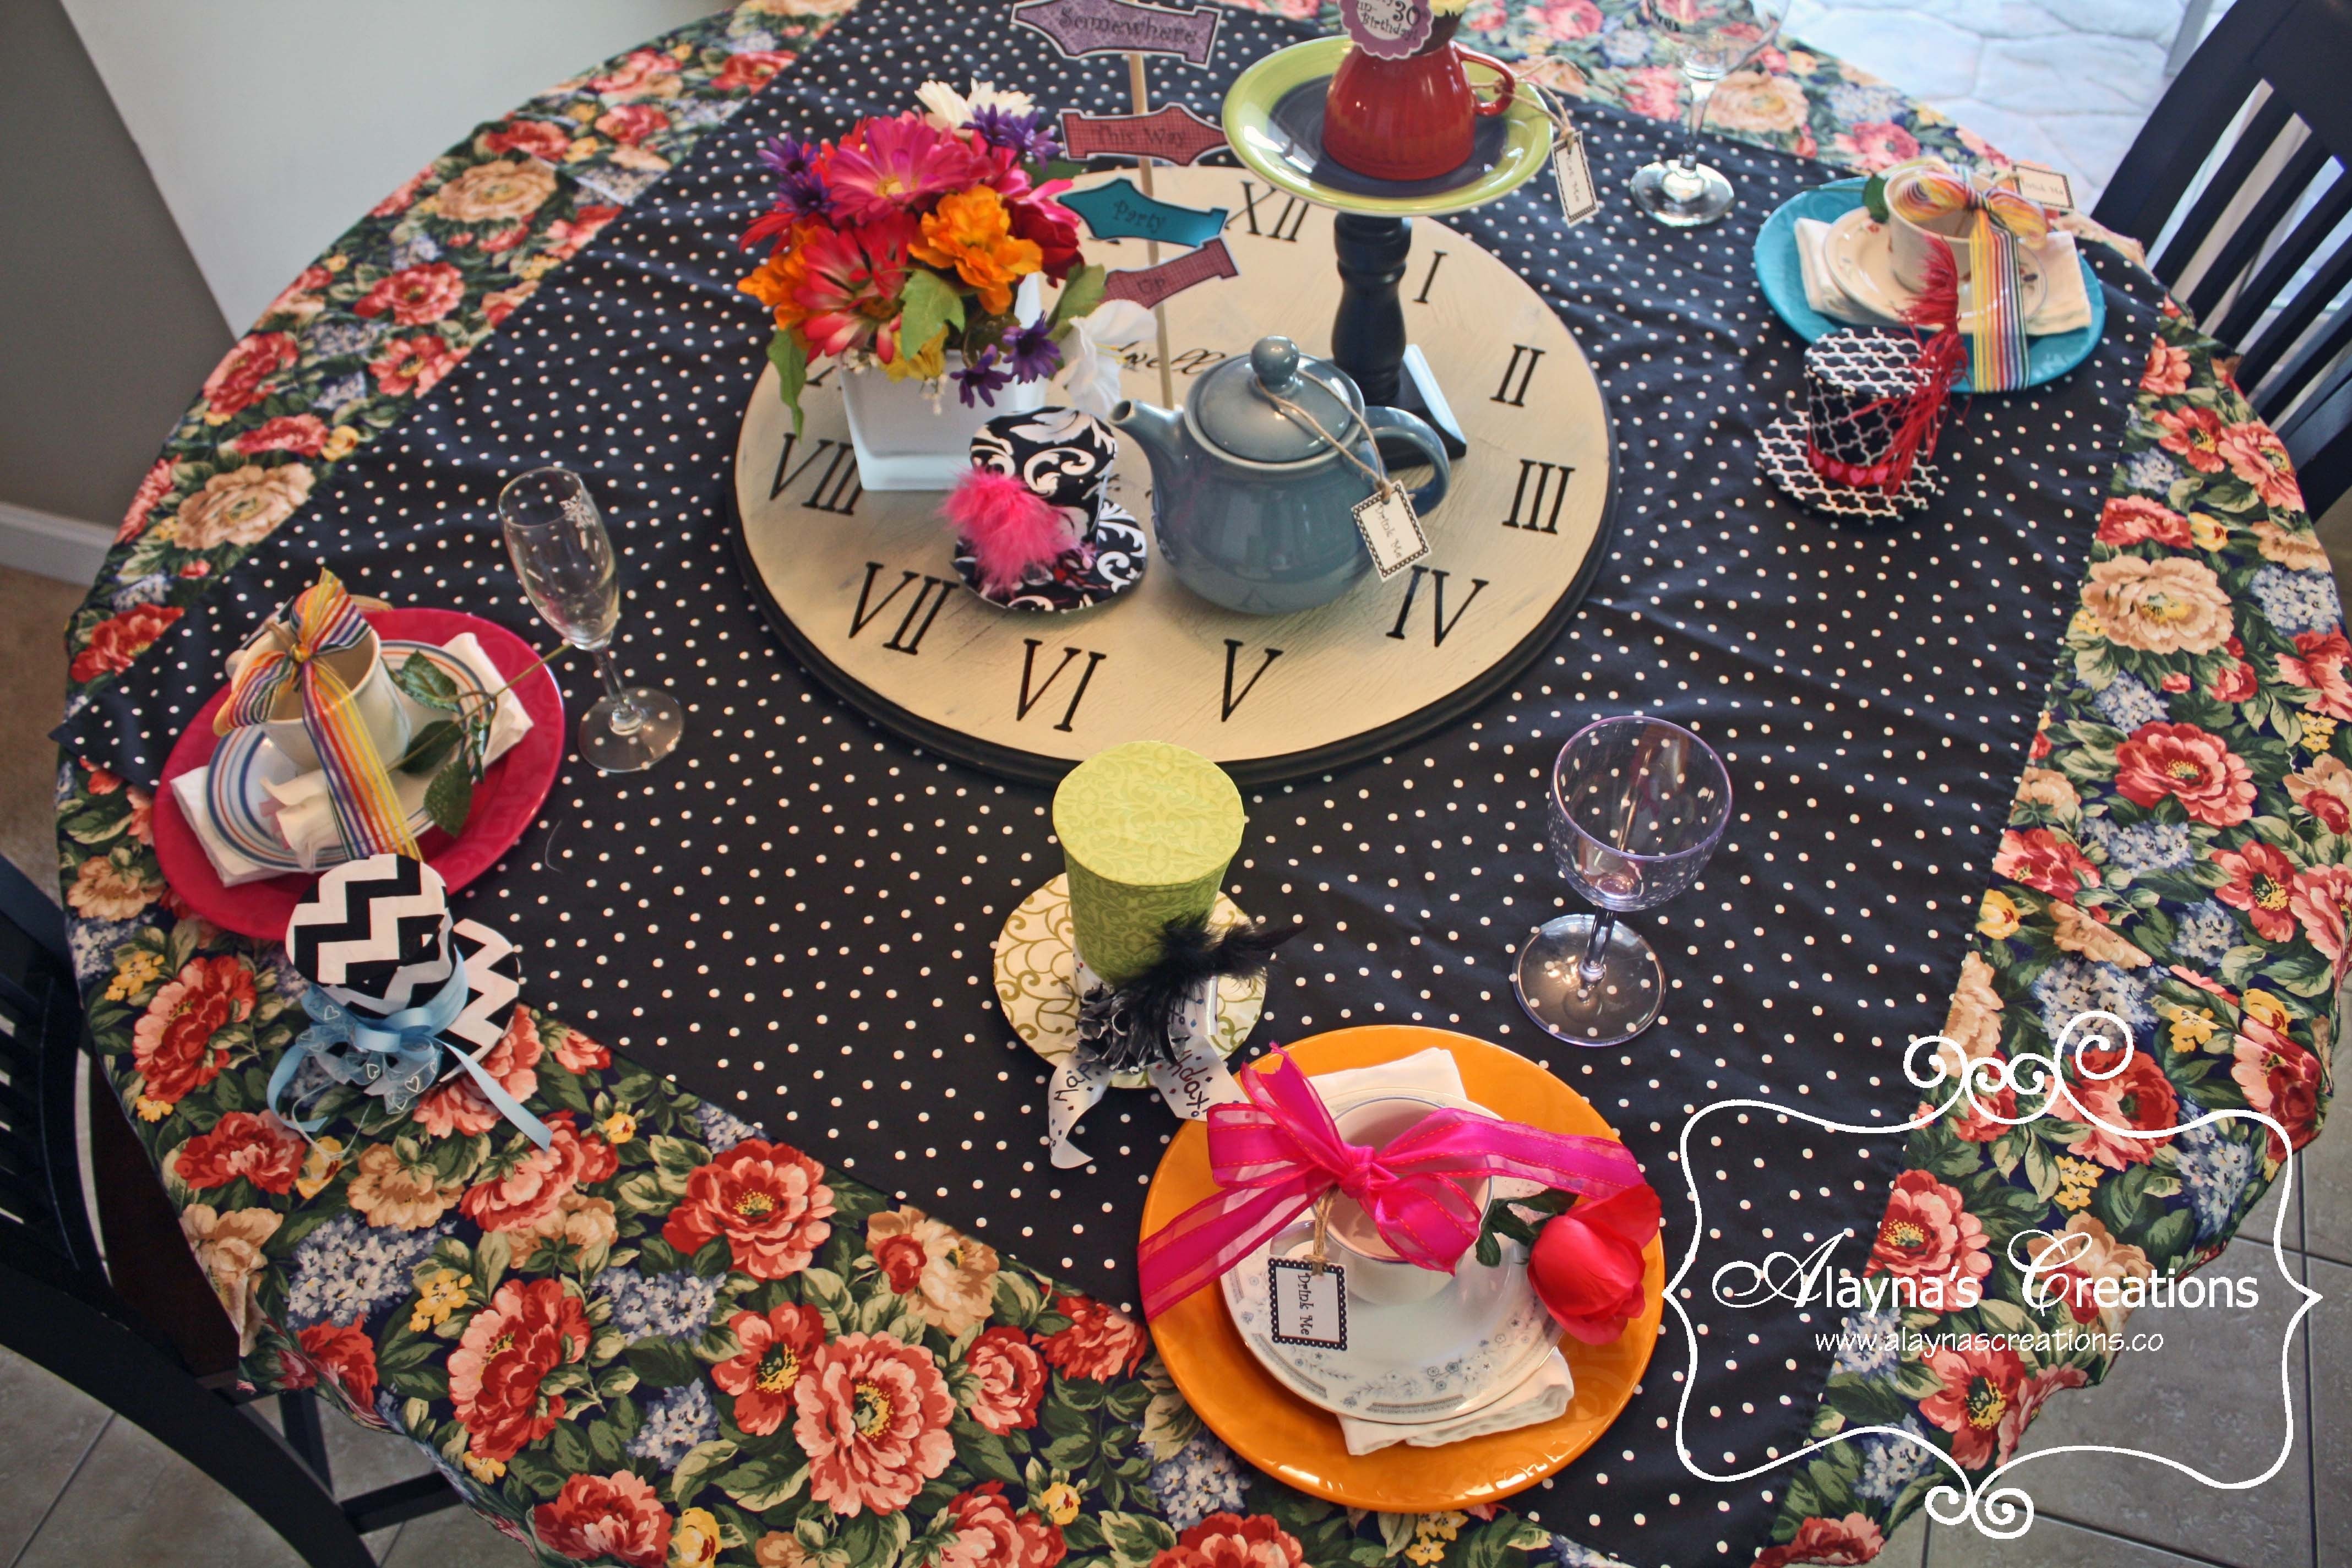 10 Most Popular Mad Hatters Tea Party Ideas 30th birthday un birthday mad hatter tea party diy home decor and 2022